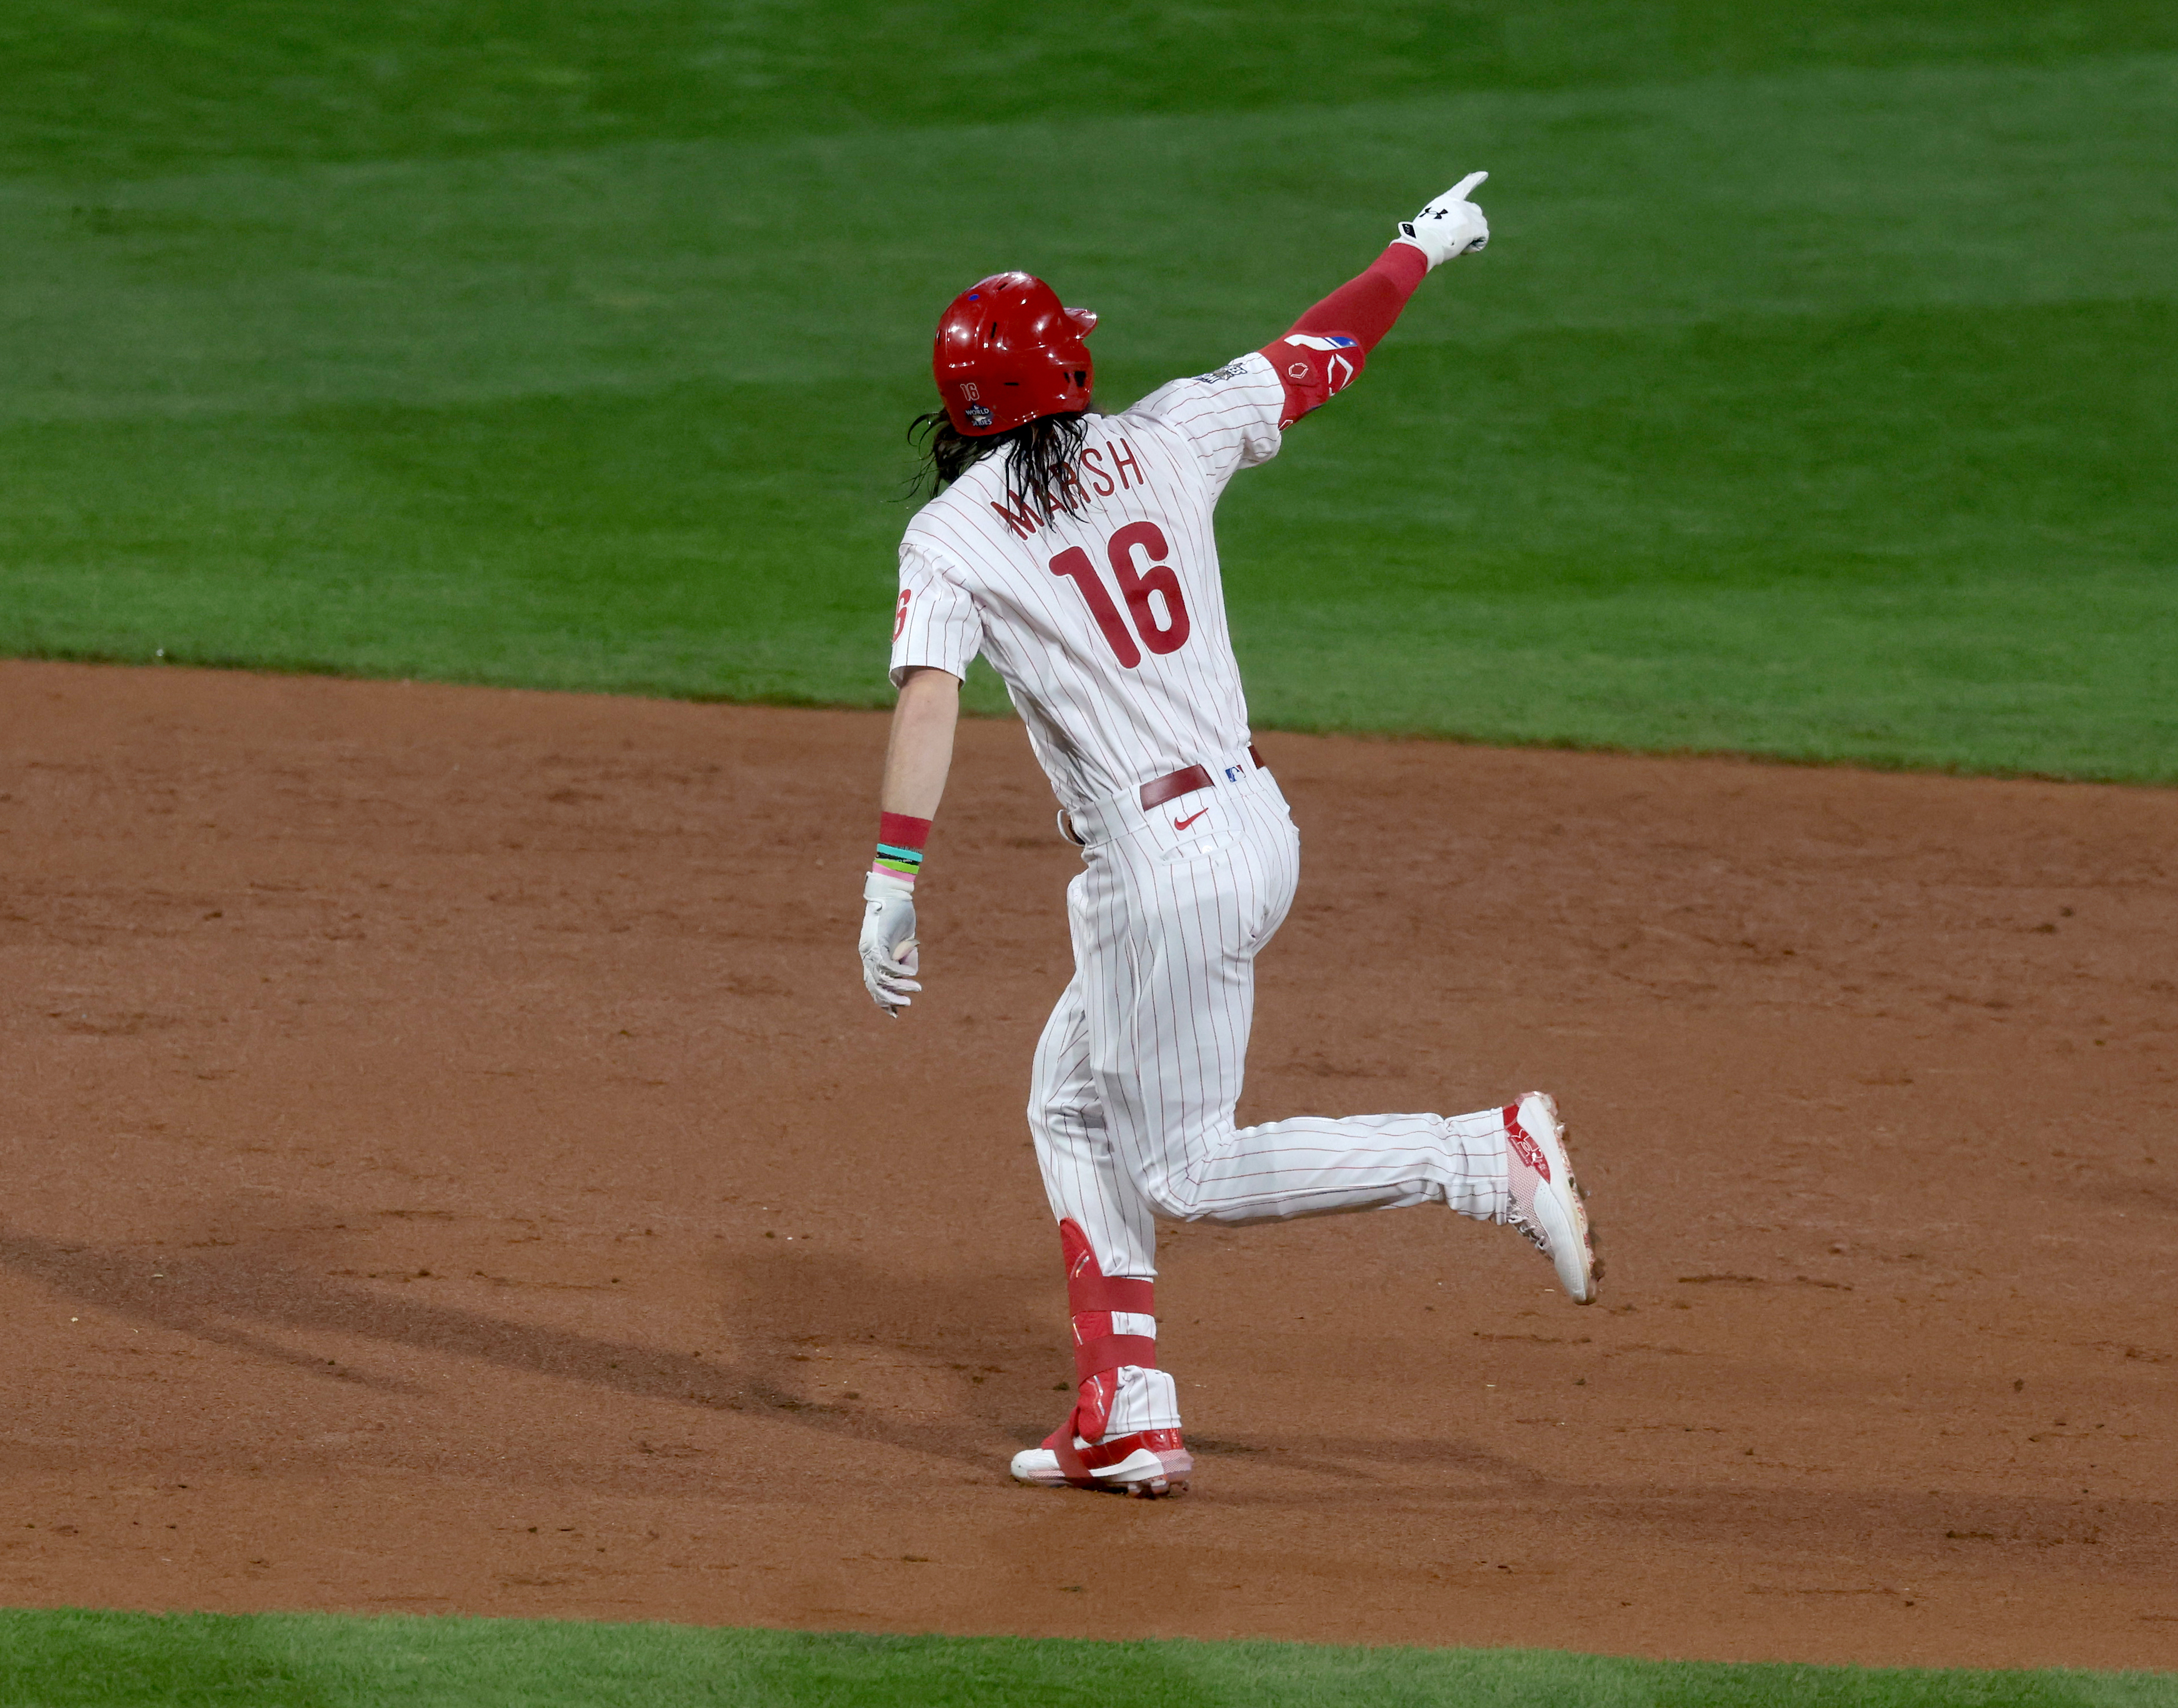 Brandon Marsh (16) of the Philadelphia Phillies reacts after hitting a home run vs. the Houston Astros in the second inning during Game 3 of the World Series at Citizens Bank Park, Tuesday, Nov. 1 2022.